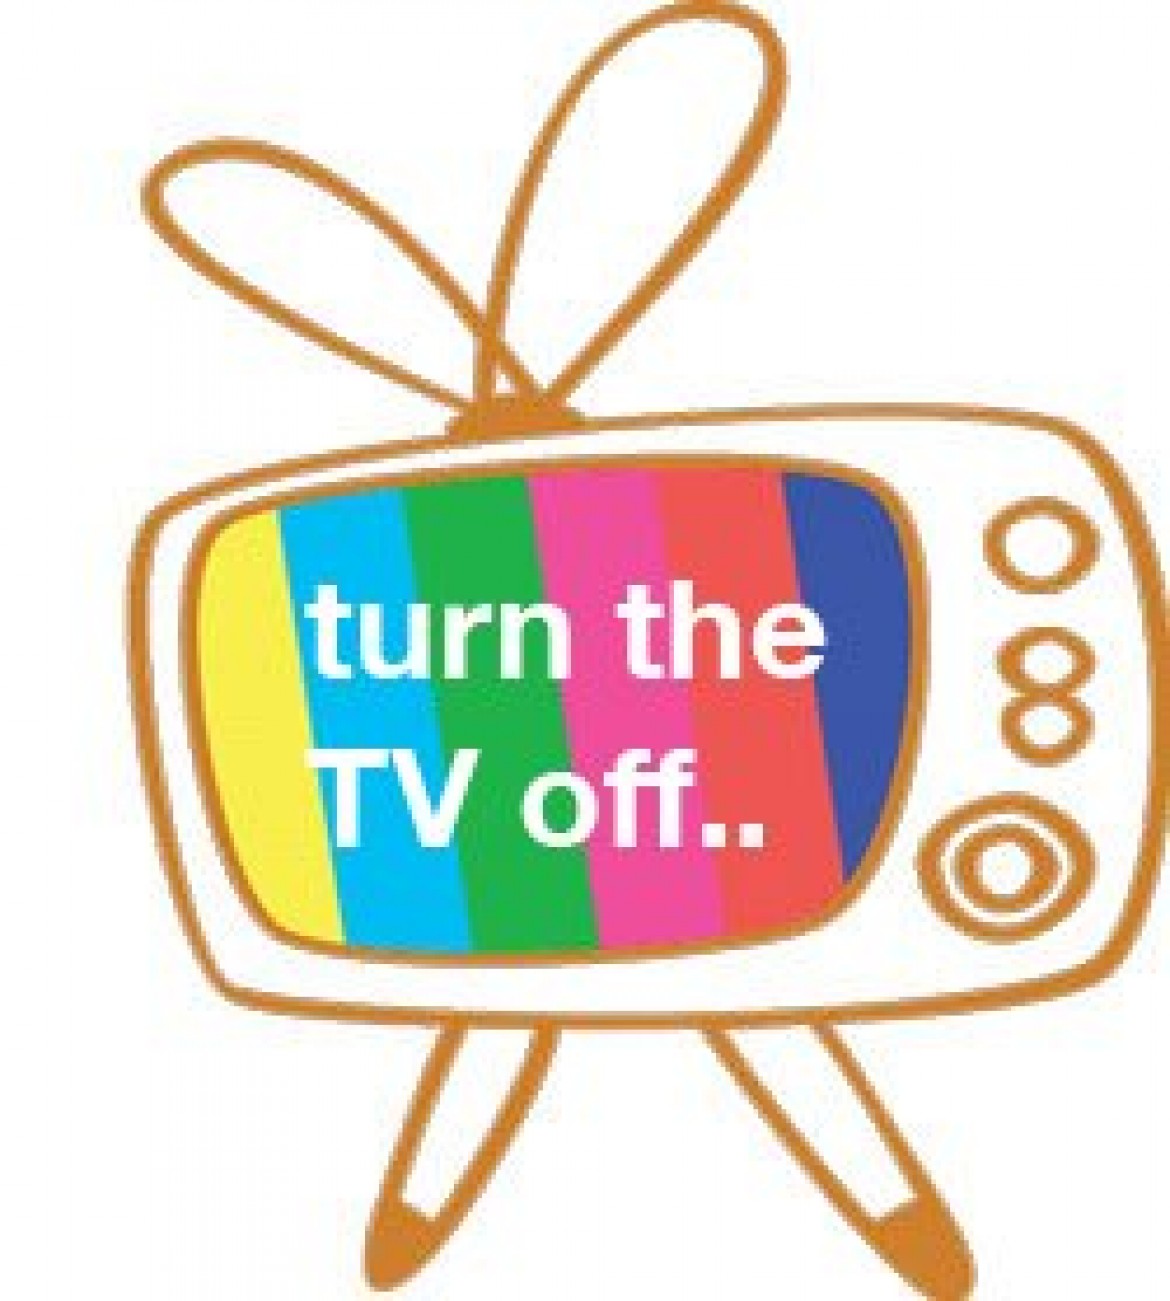 Can you turn the tv